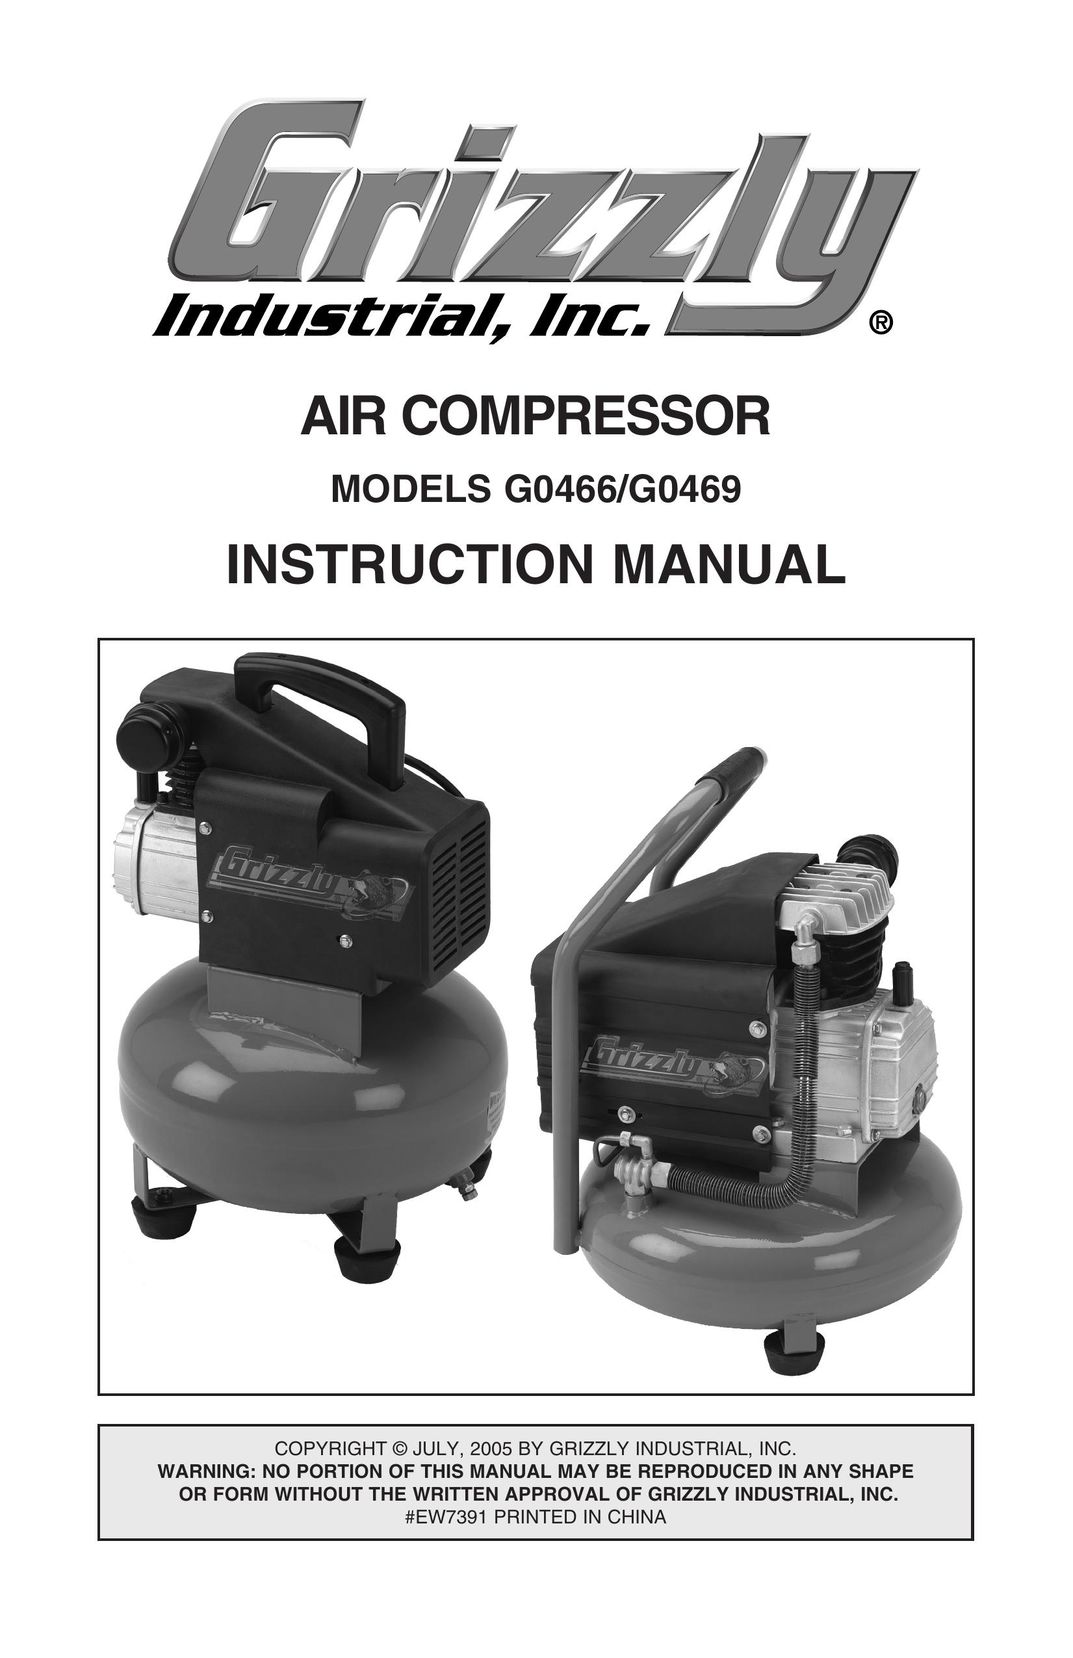 Grizzly G0469 Air Compressor User Manual